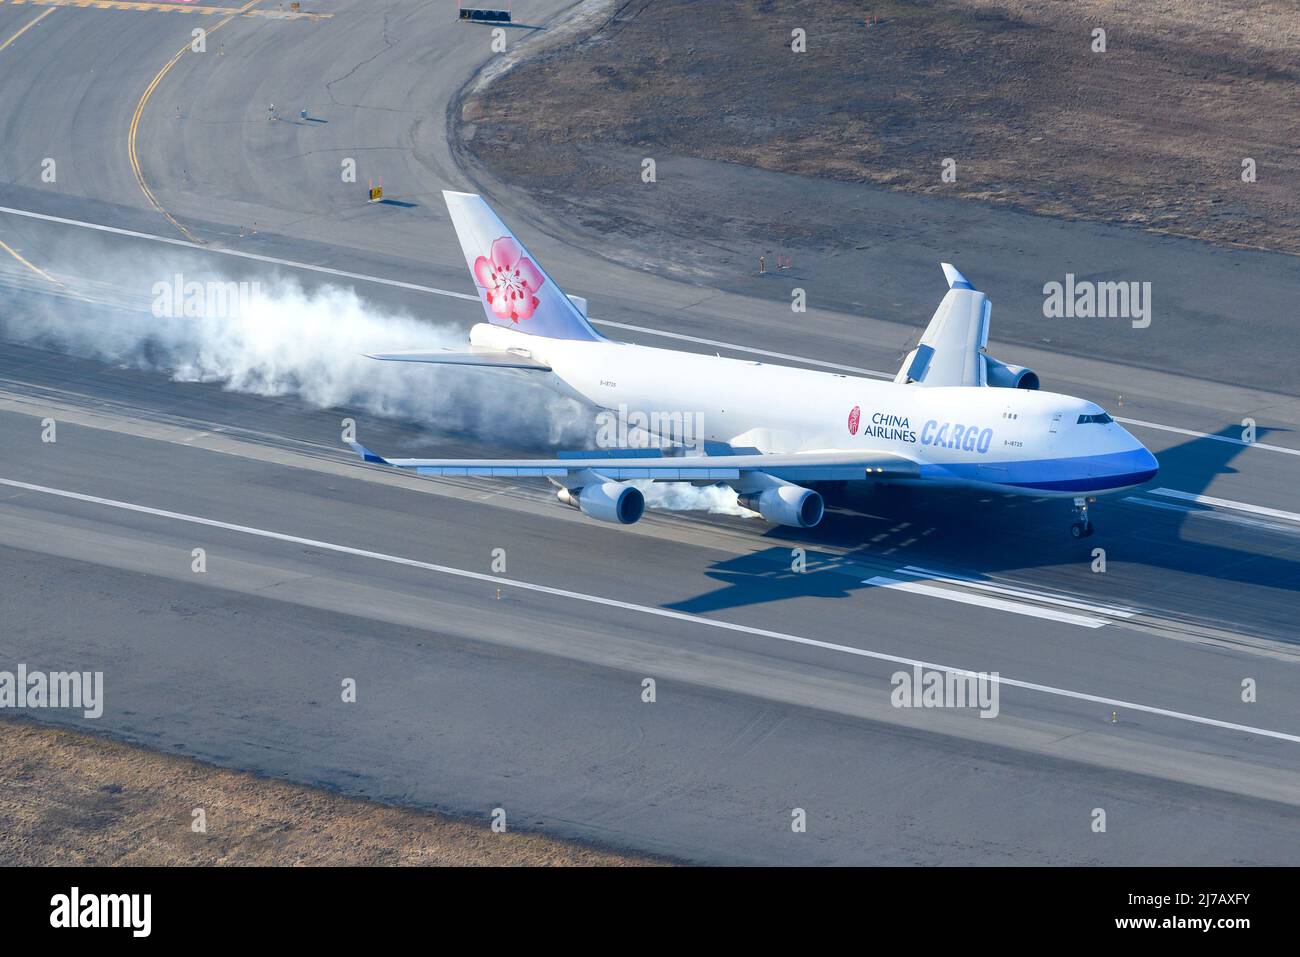 China Airlines Cargo Boeing 747 freighter aircraft hard landing. Large cargo airplane 747-400F aerial view. Plane 747F arrival. Landing gear smoke. Stock Photo